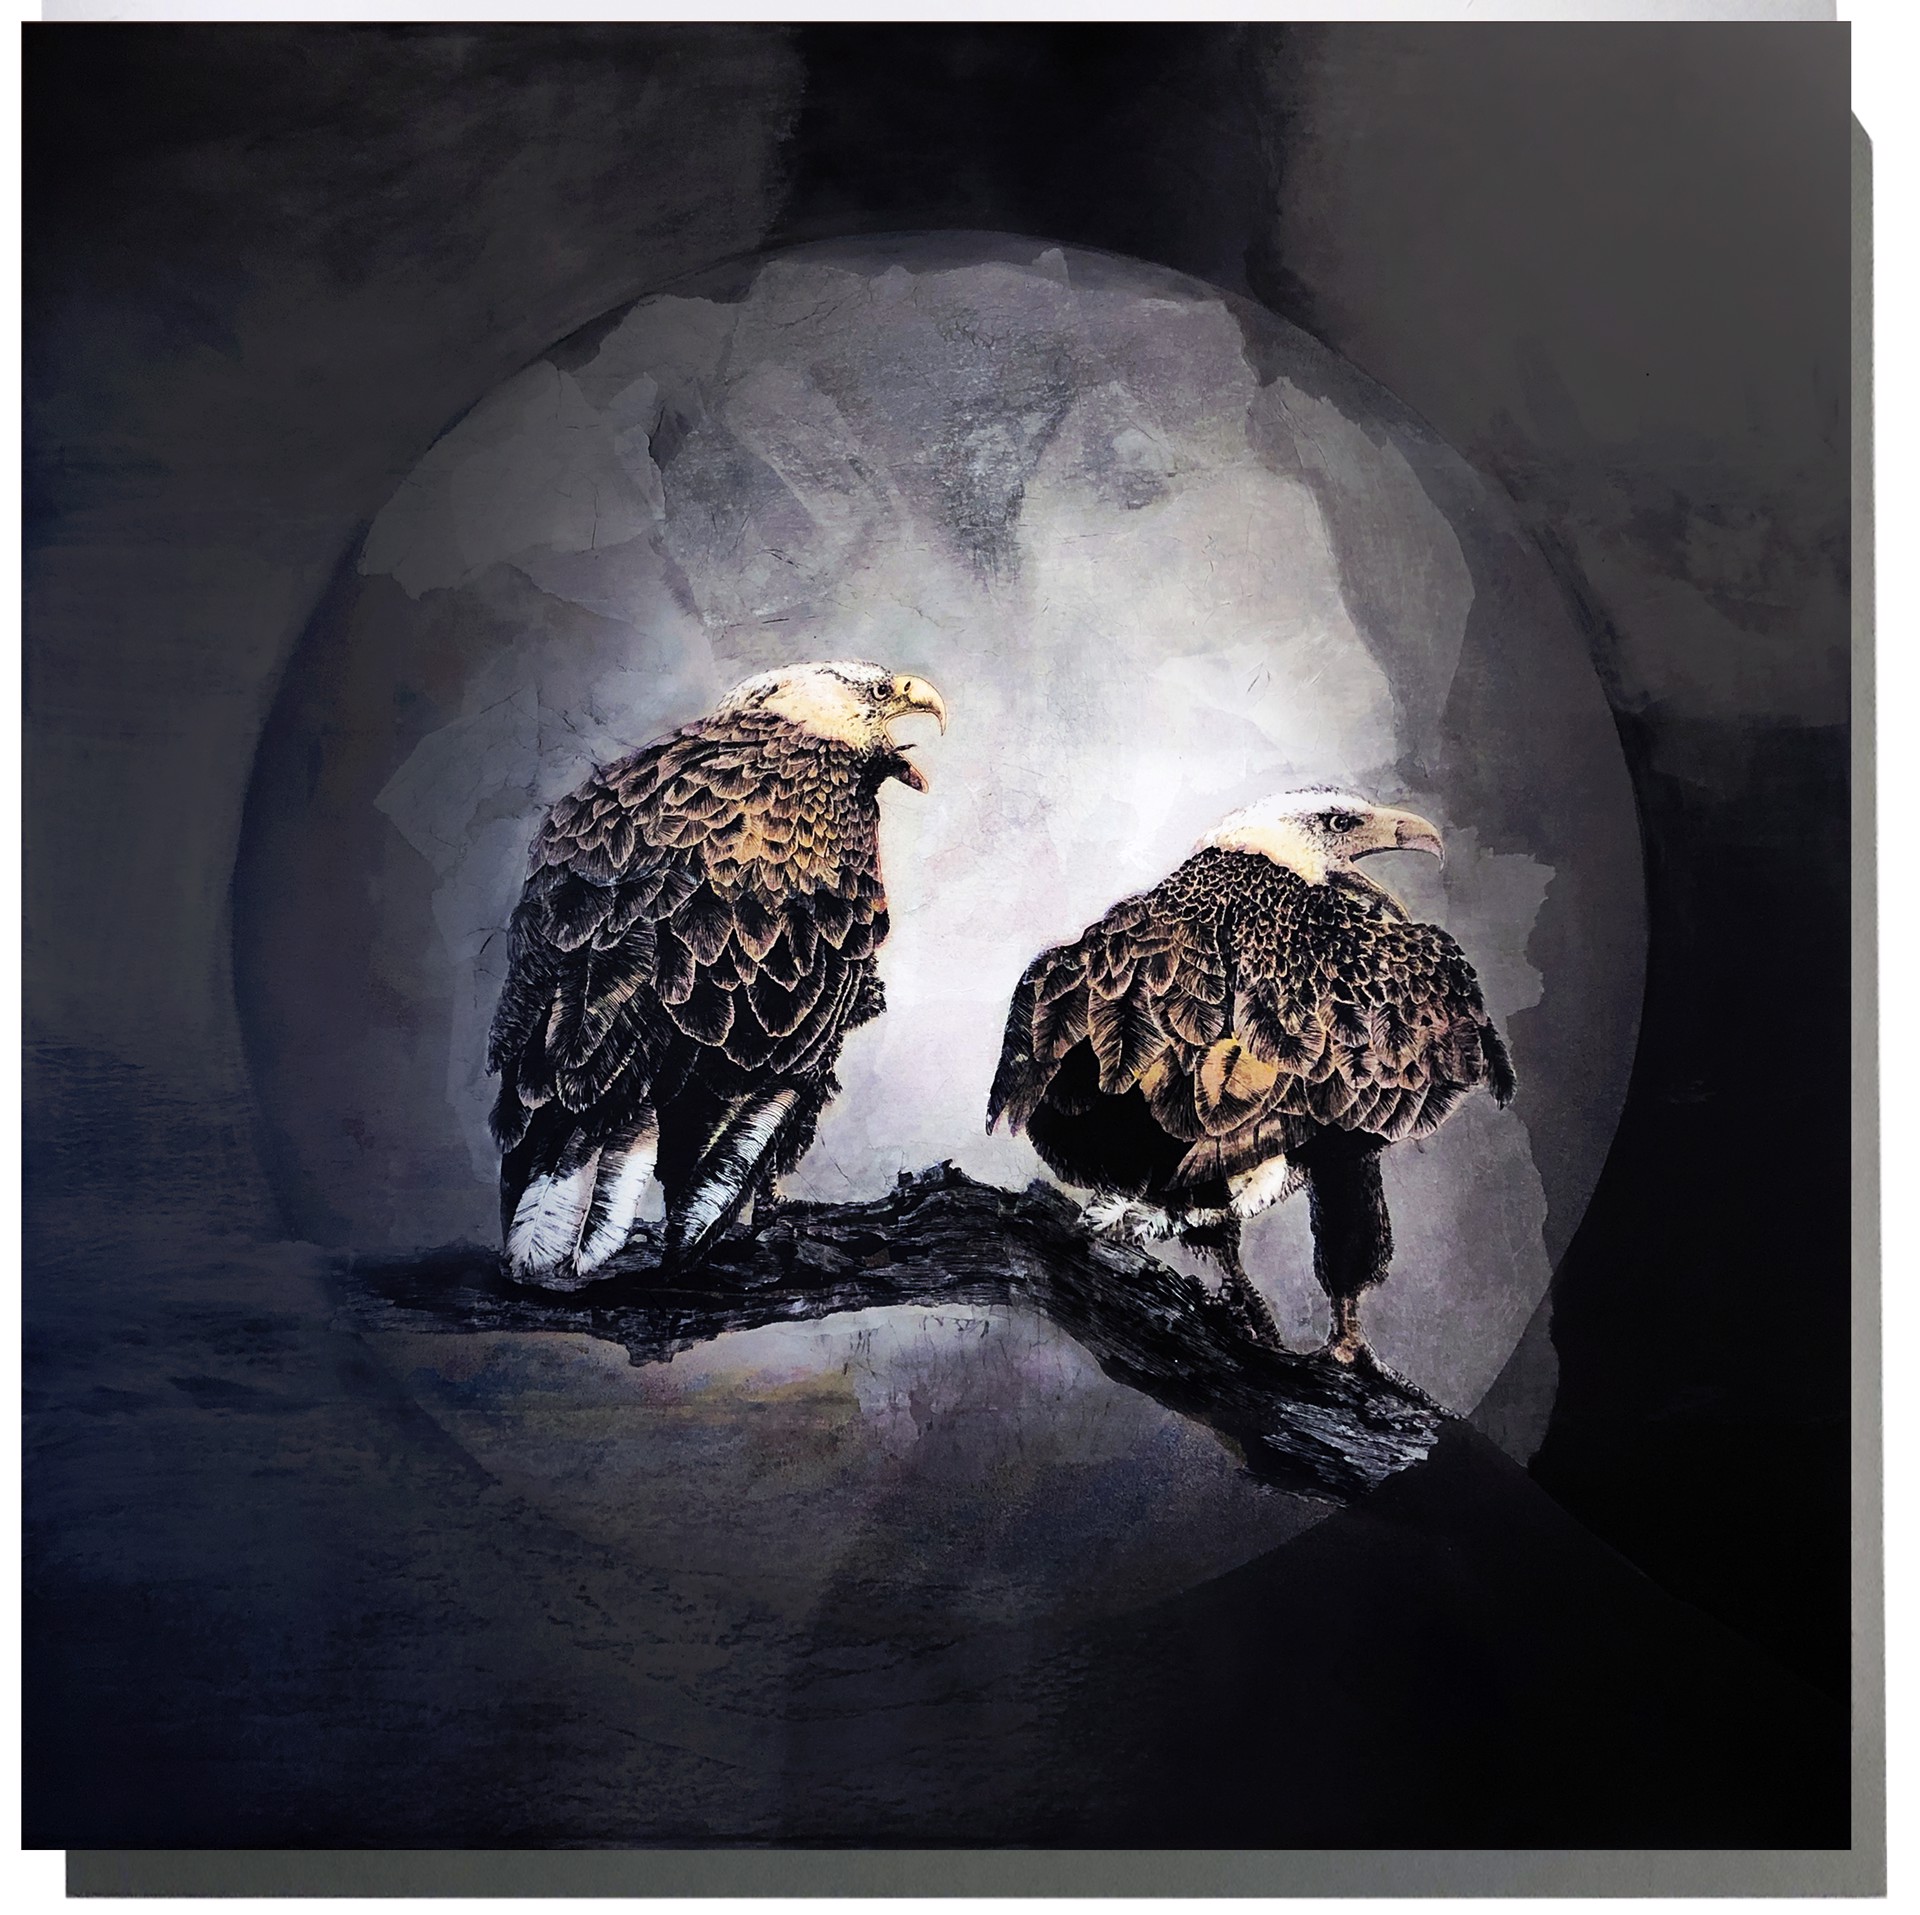 Chauvin Bald Eagles by Pippin Frisbie-Calder